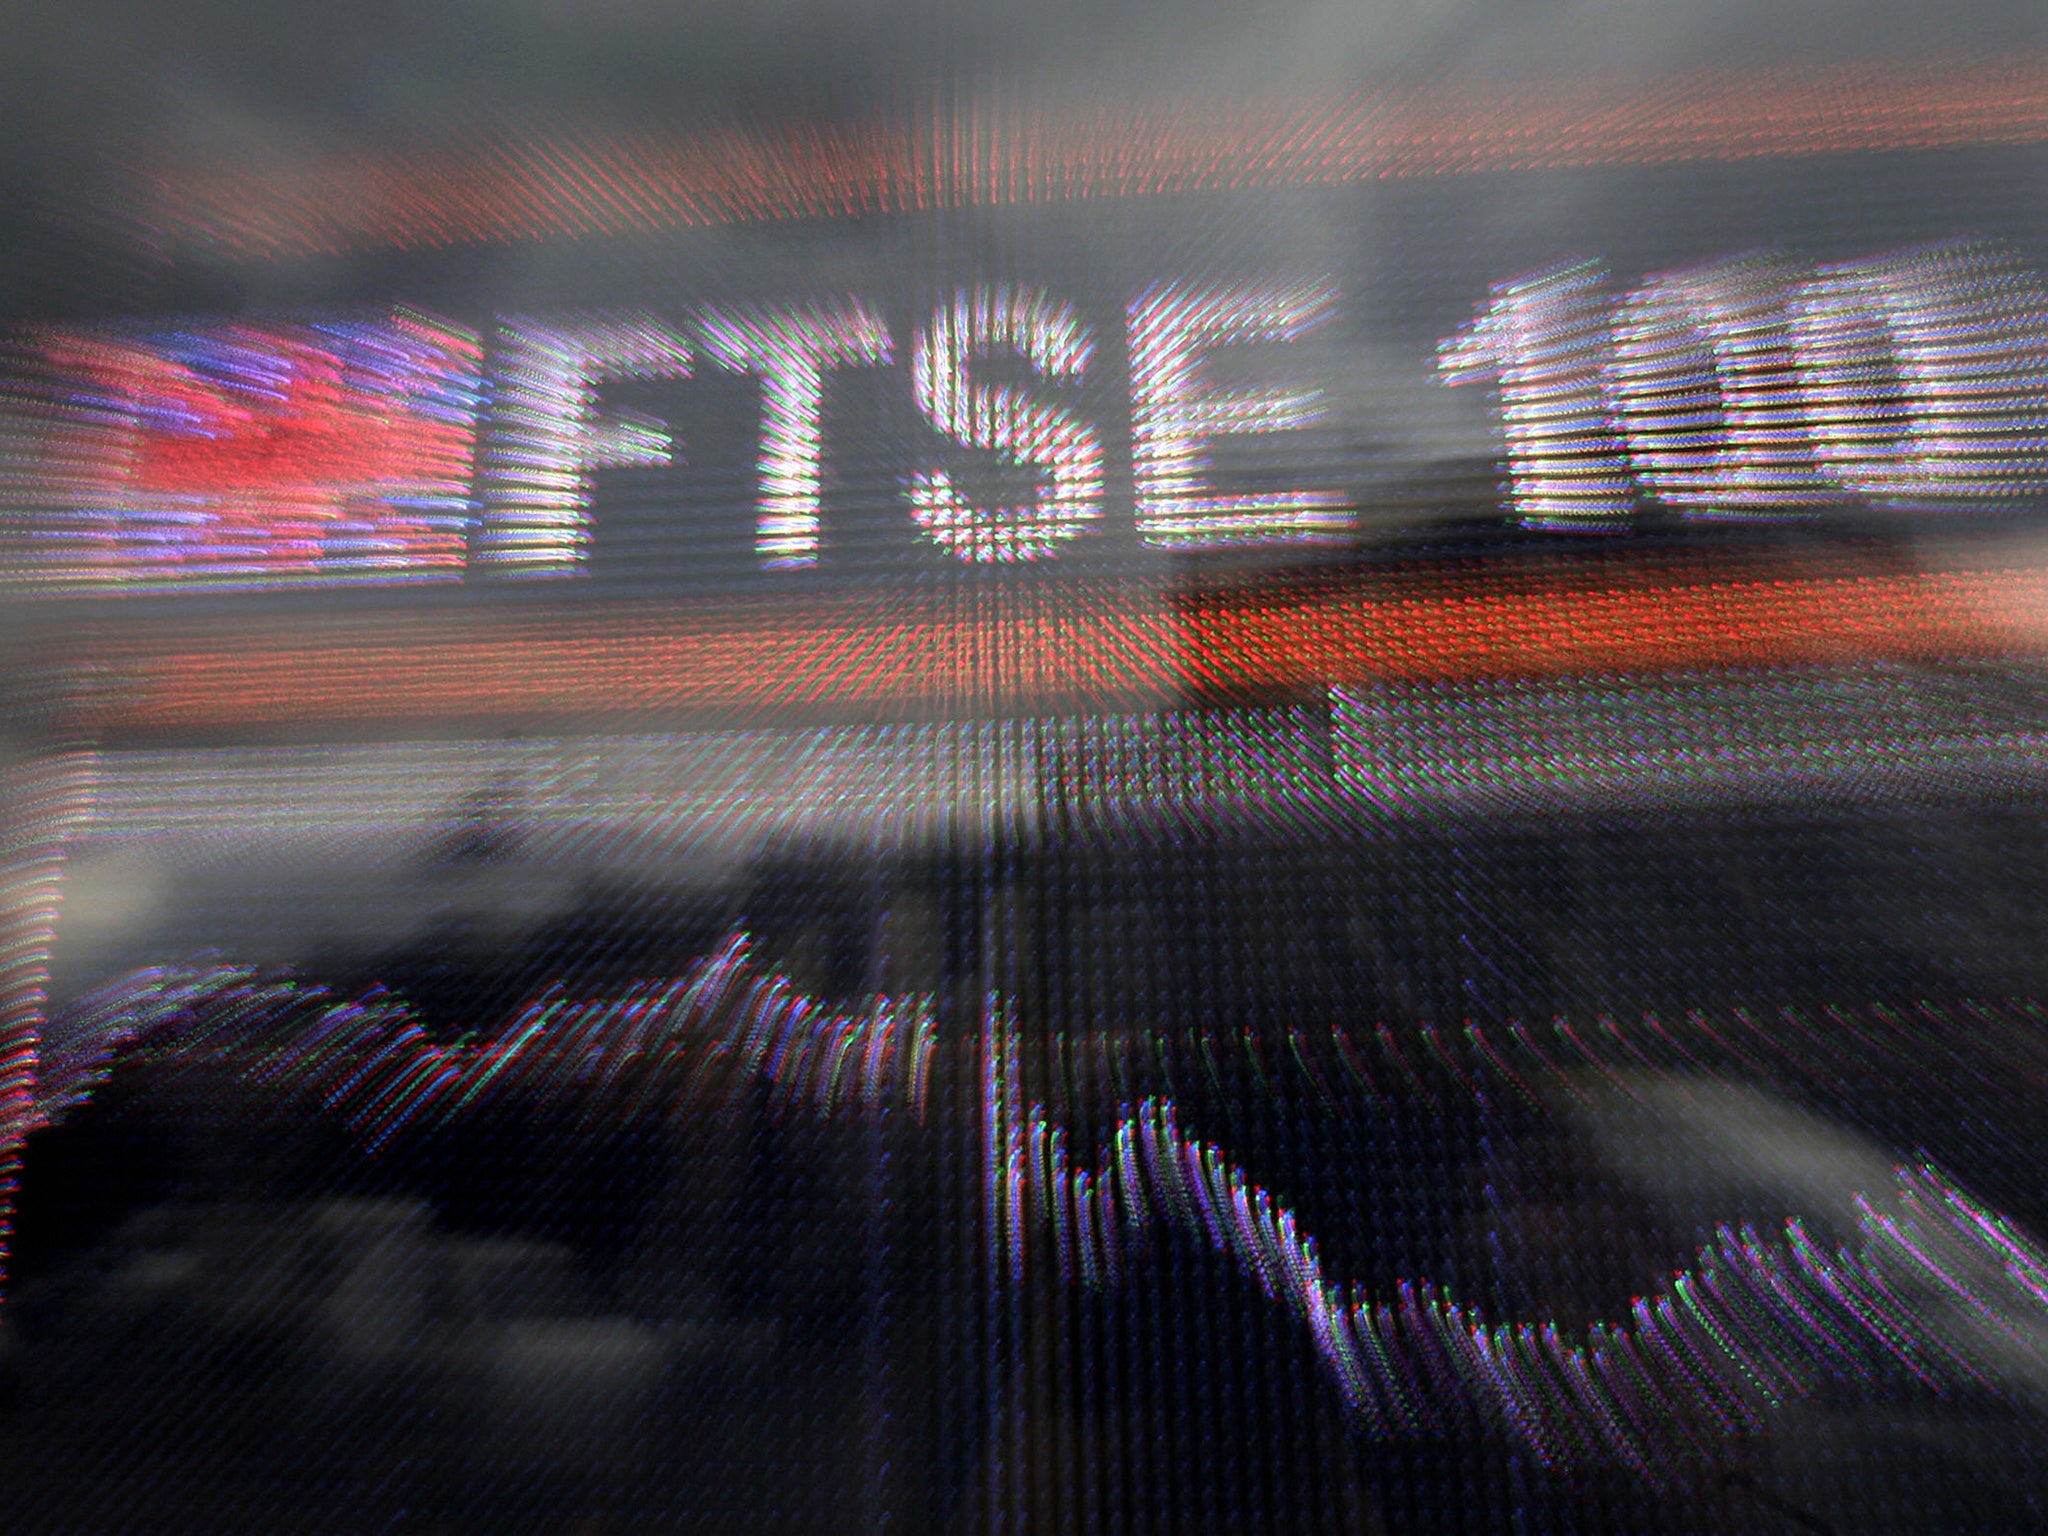 Britain's benchmark share index, the FTSE 100, closed at an all-time high on Wednesday